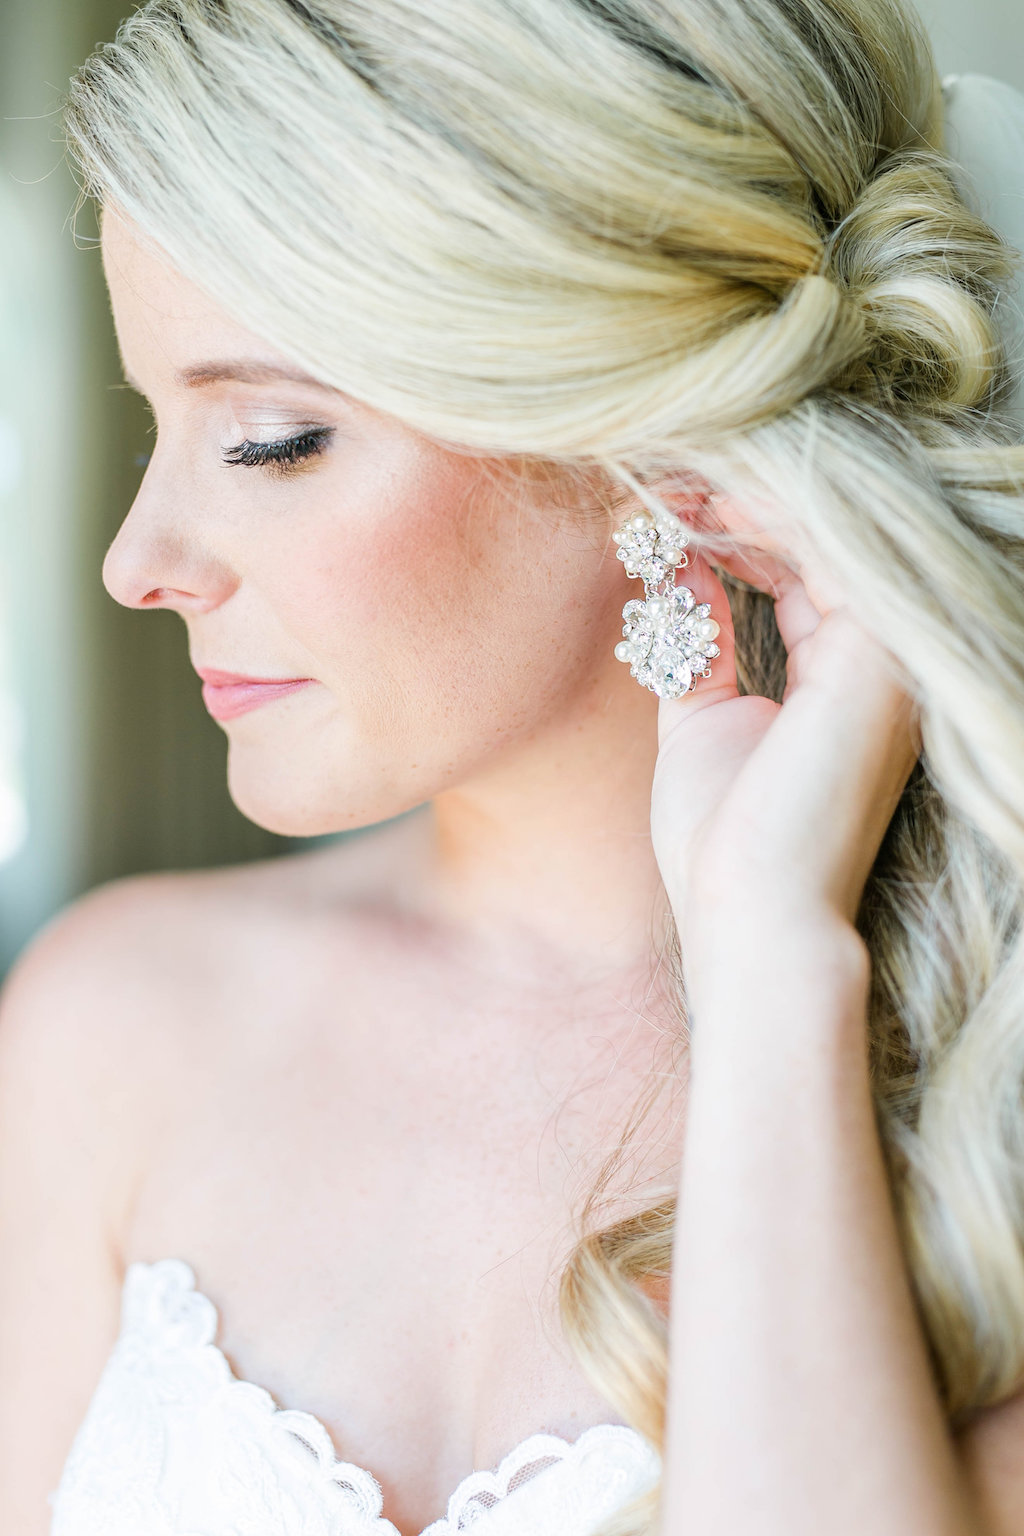 Bride Getting Ready Wedding Portrait with Chandelier Diamond Earrings | Tampa Bay Hair and Makeup Femme Akoi